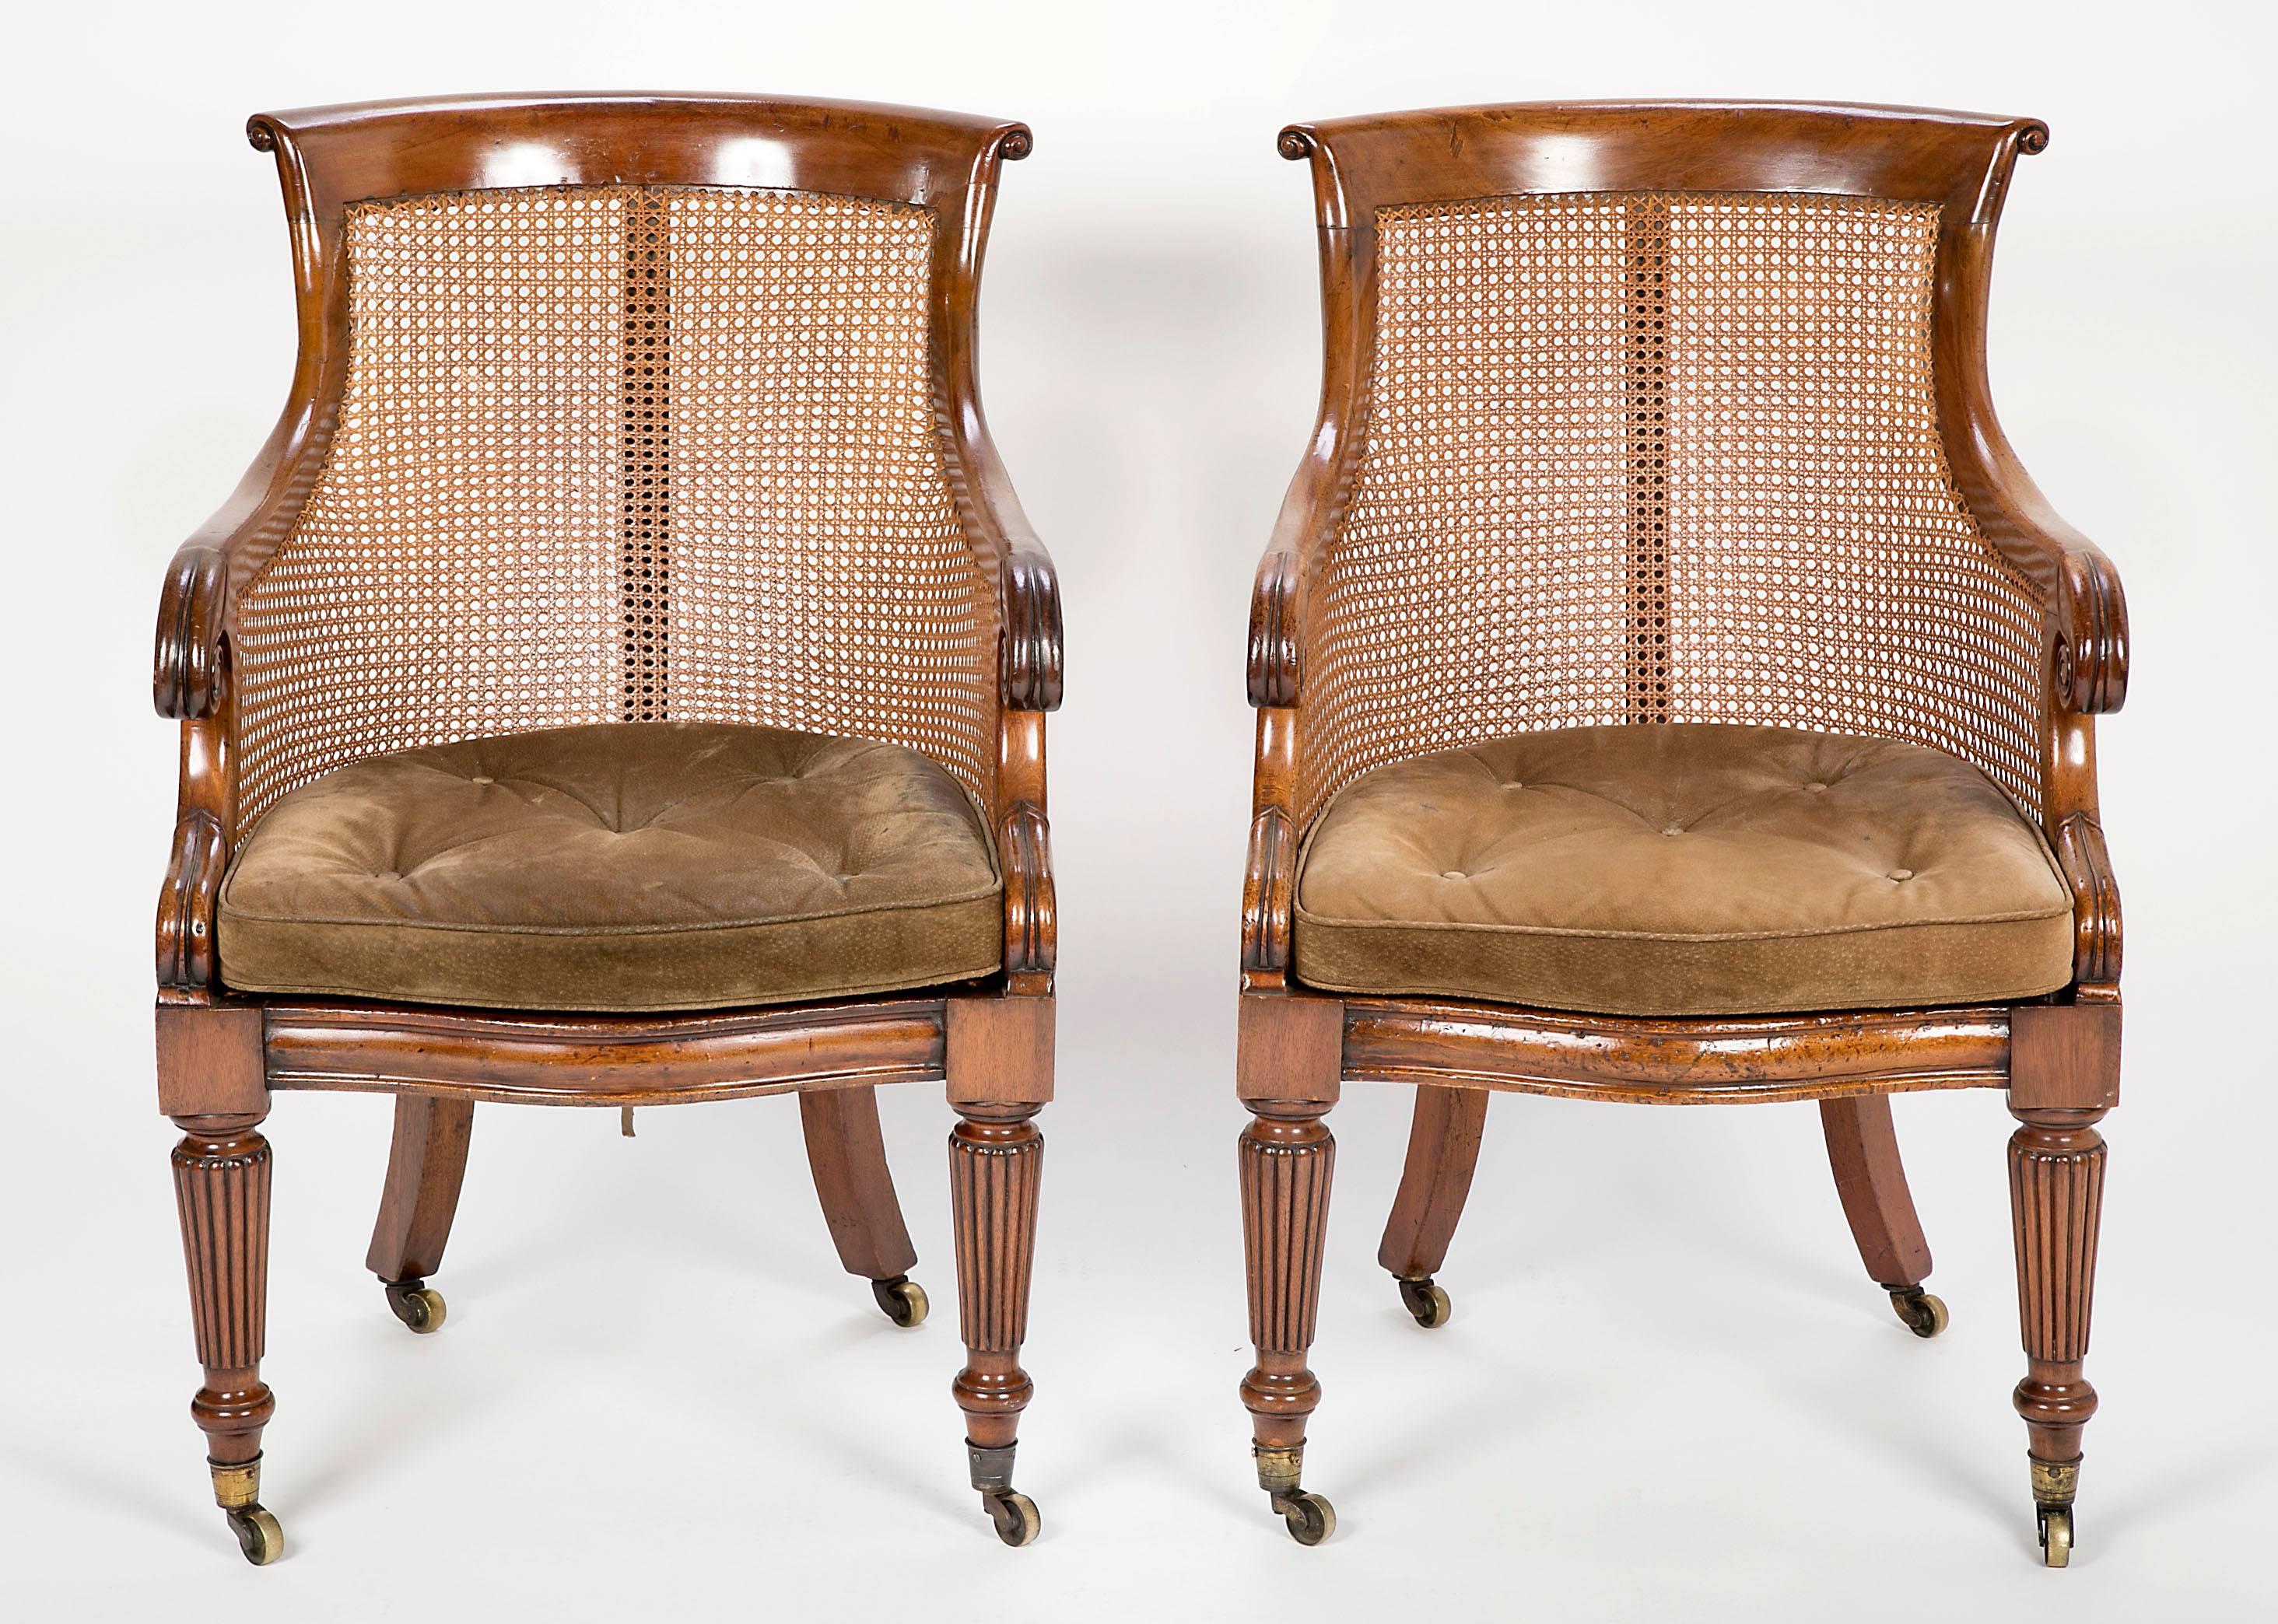 English Pair of Late Regency Mahogany and Caned Bergere Chairs